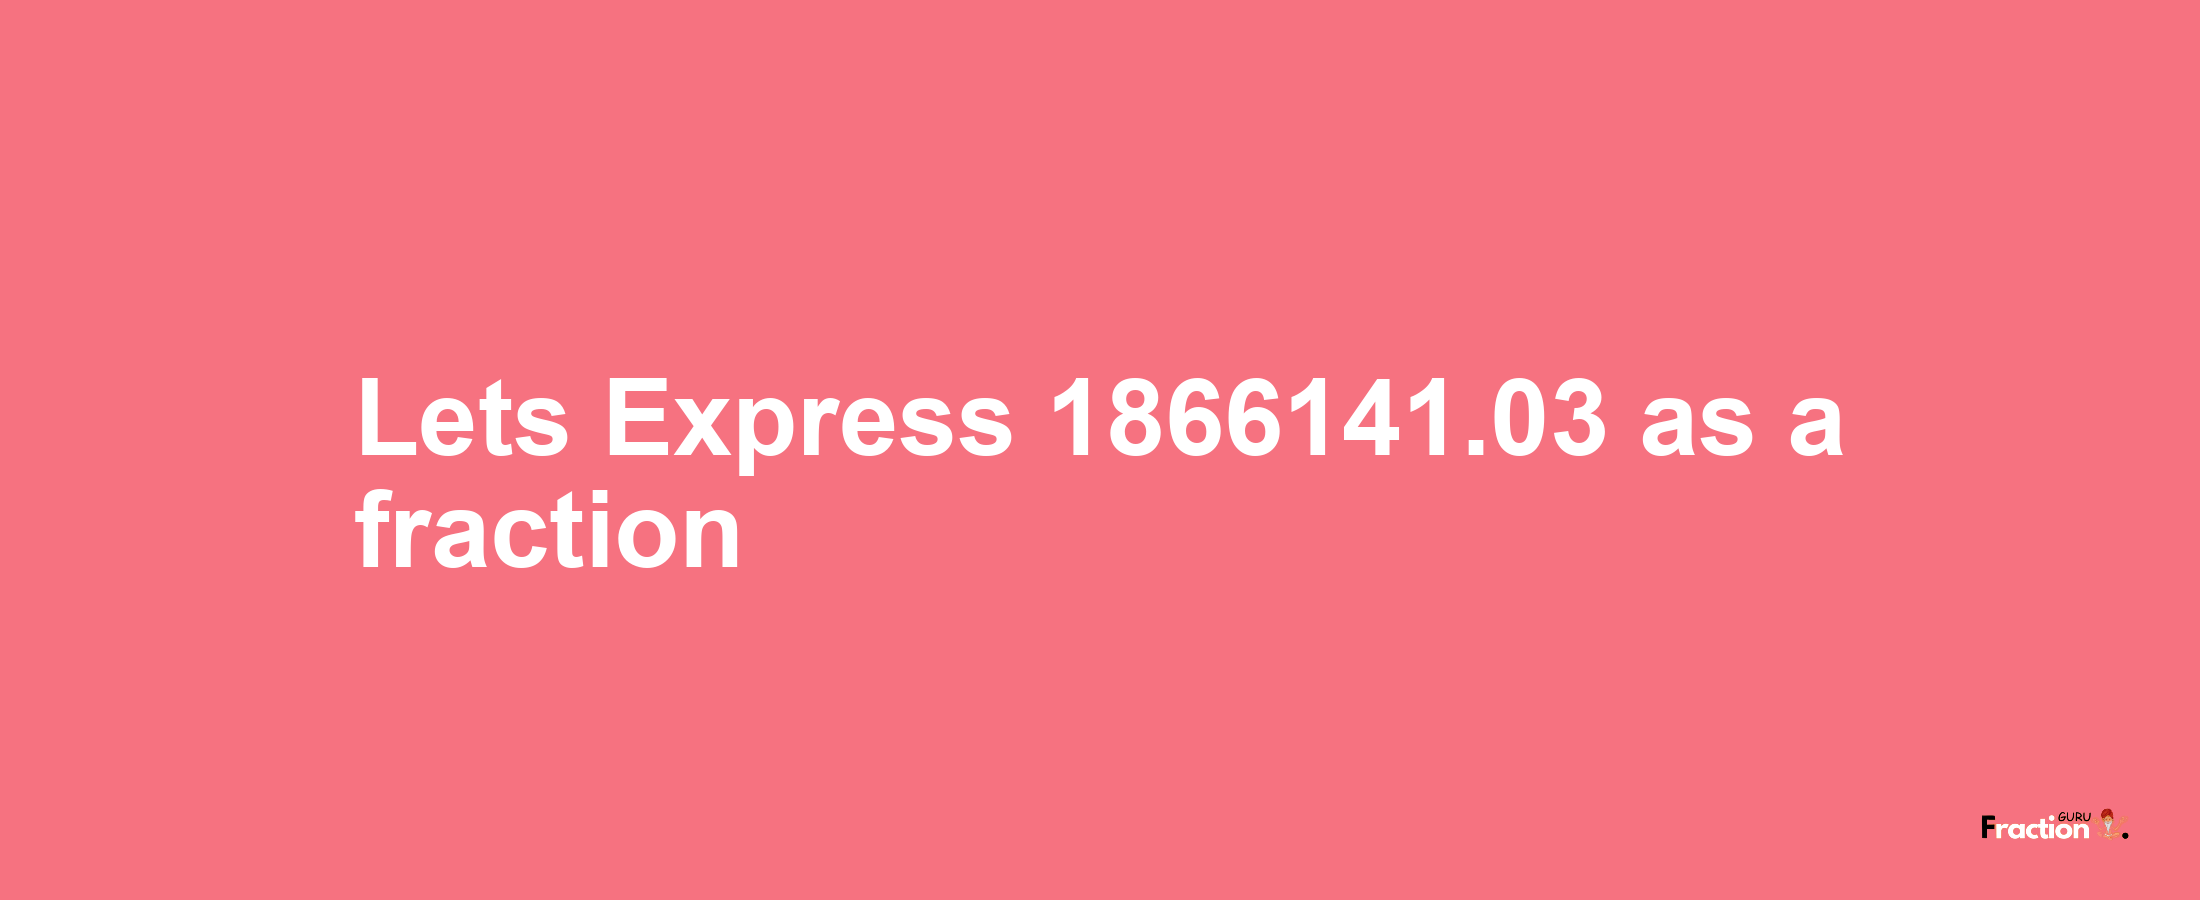 Lets Express 1866141.03 as afraction